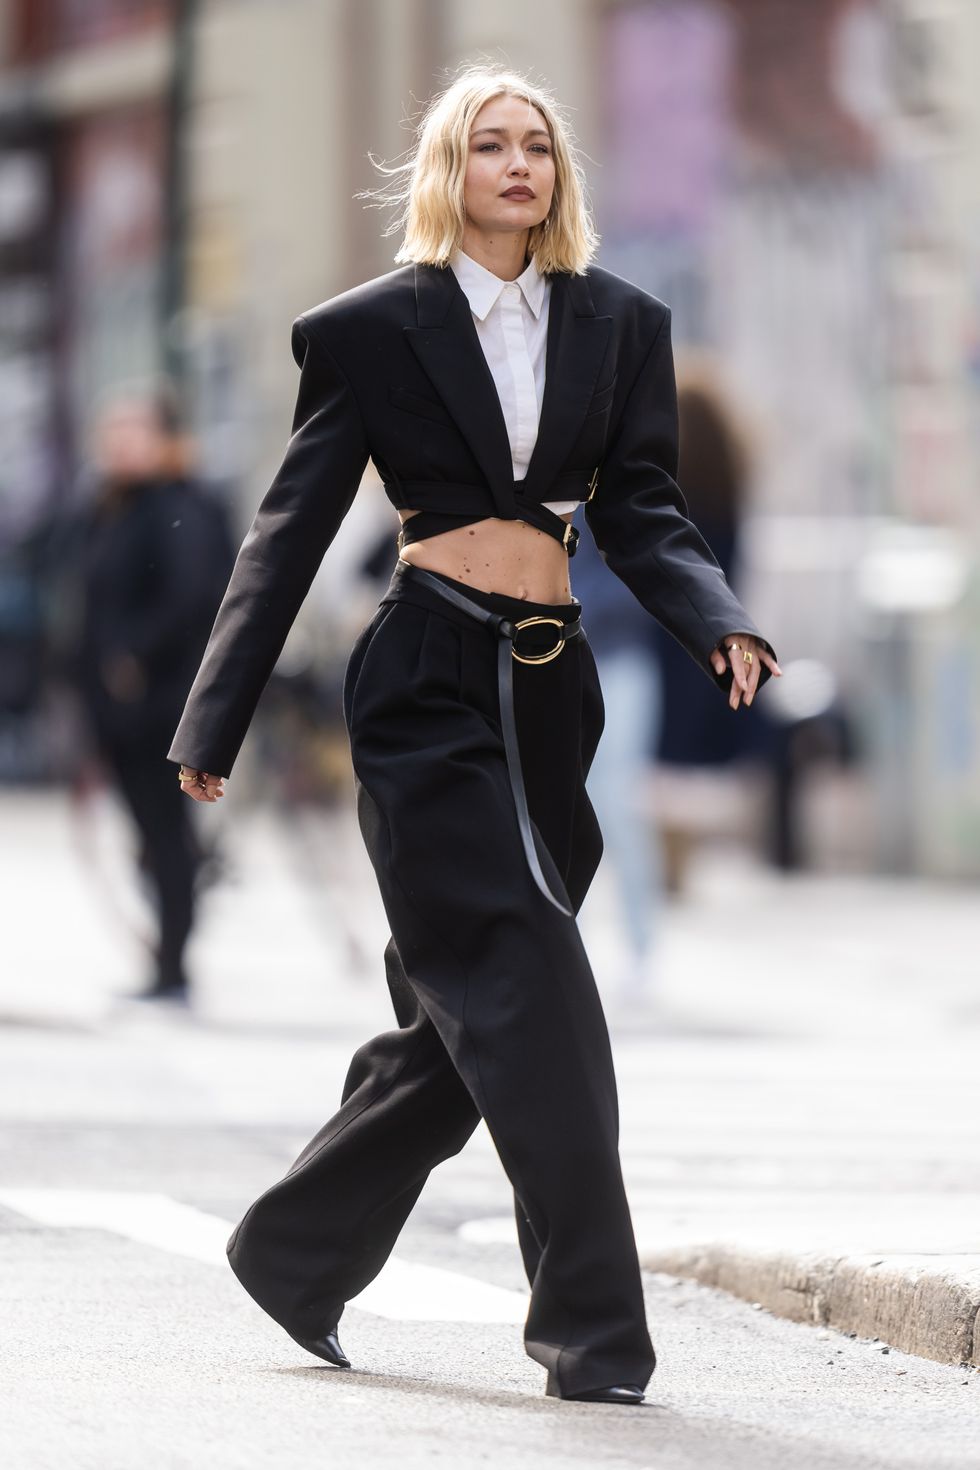 Gigi Hadid Is a Style Chameleon in Two Totally Different Outfits While Shooting in New York